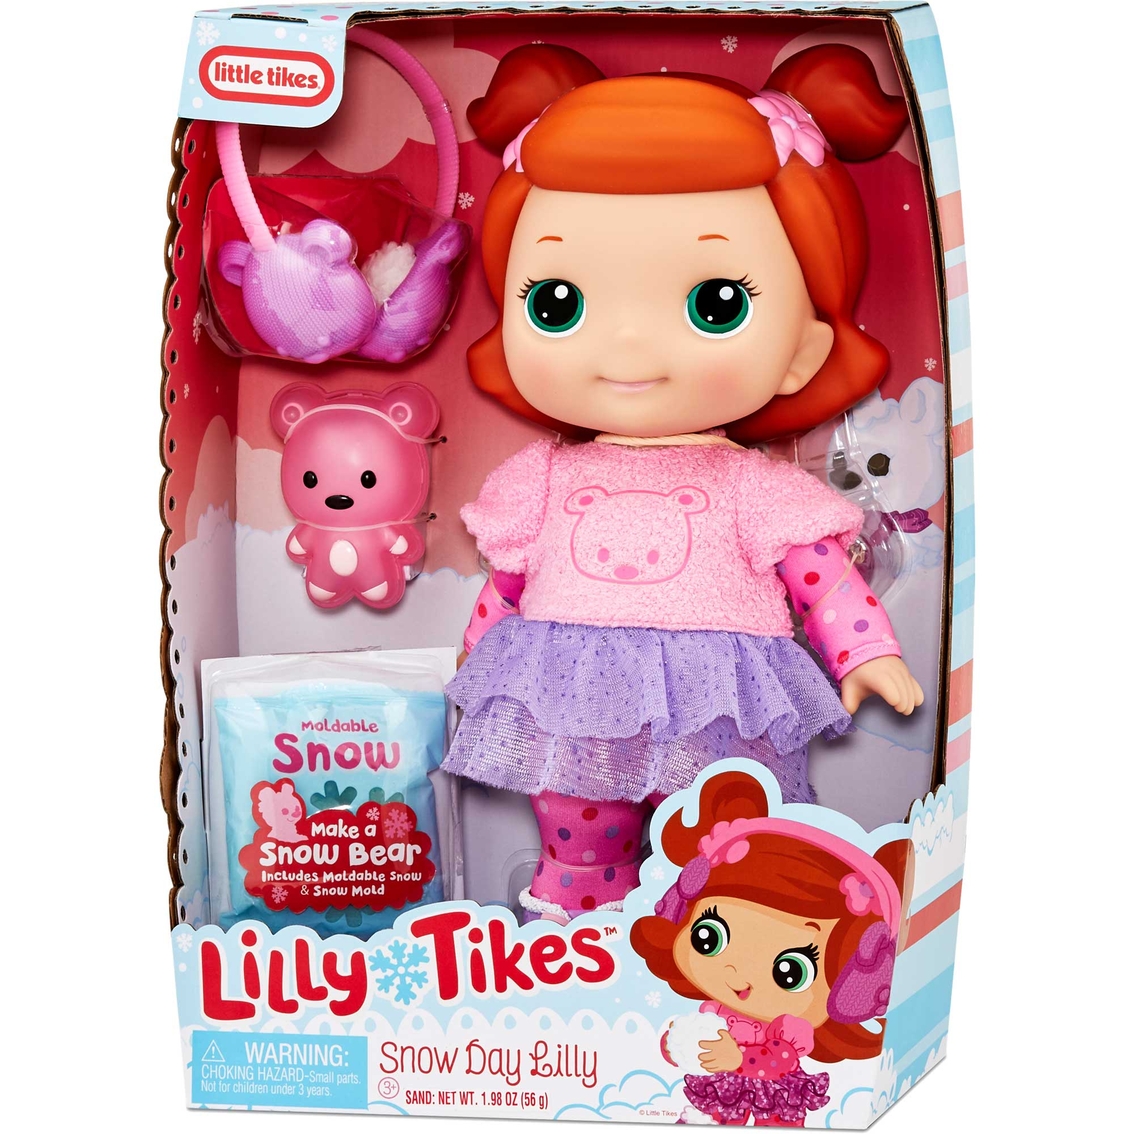 Little Tikes Lilly Tikes Snow Day Lilly Doll - Image 6 of 7